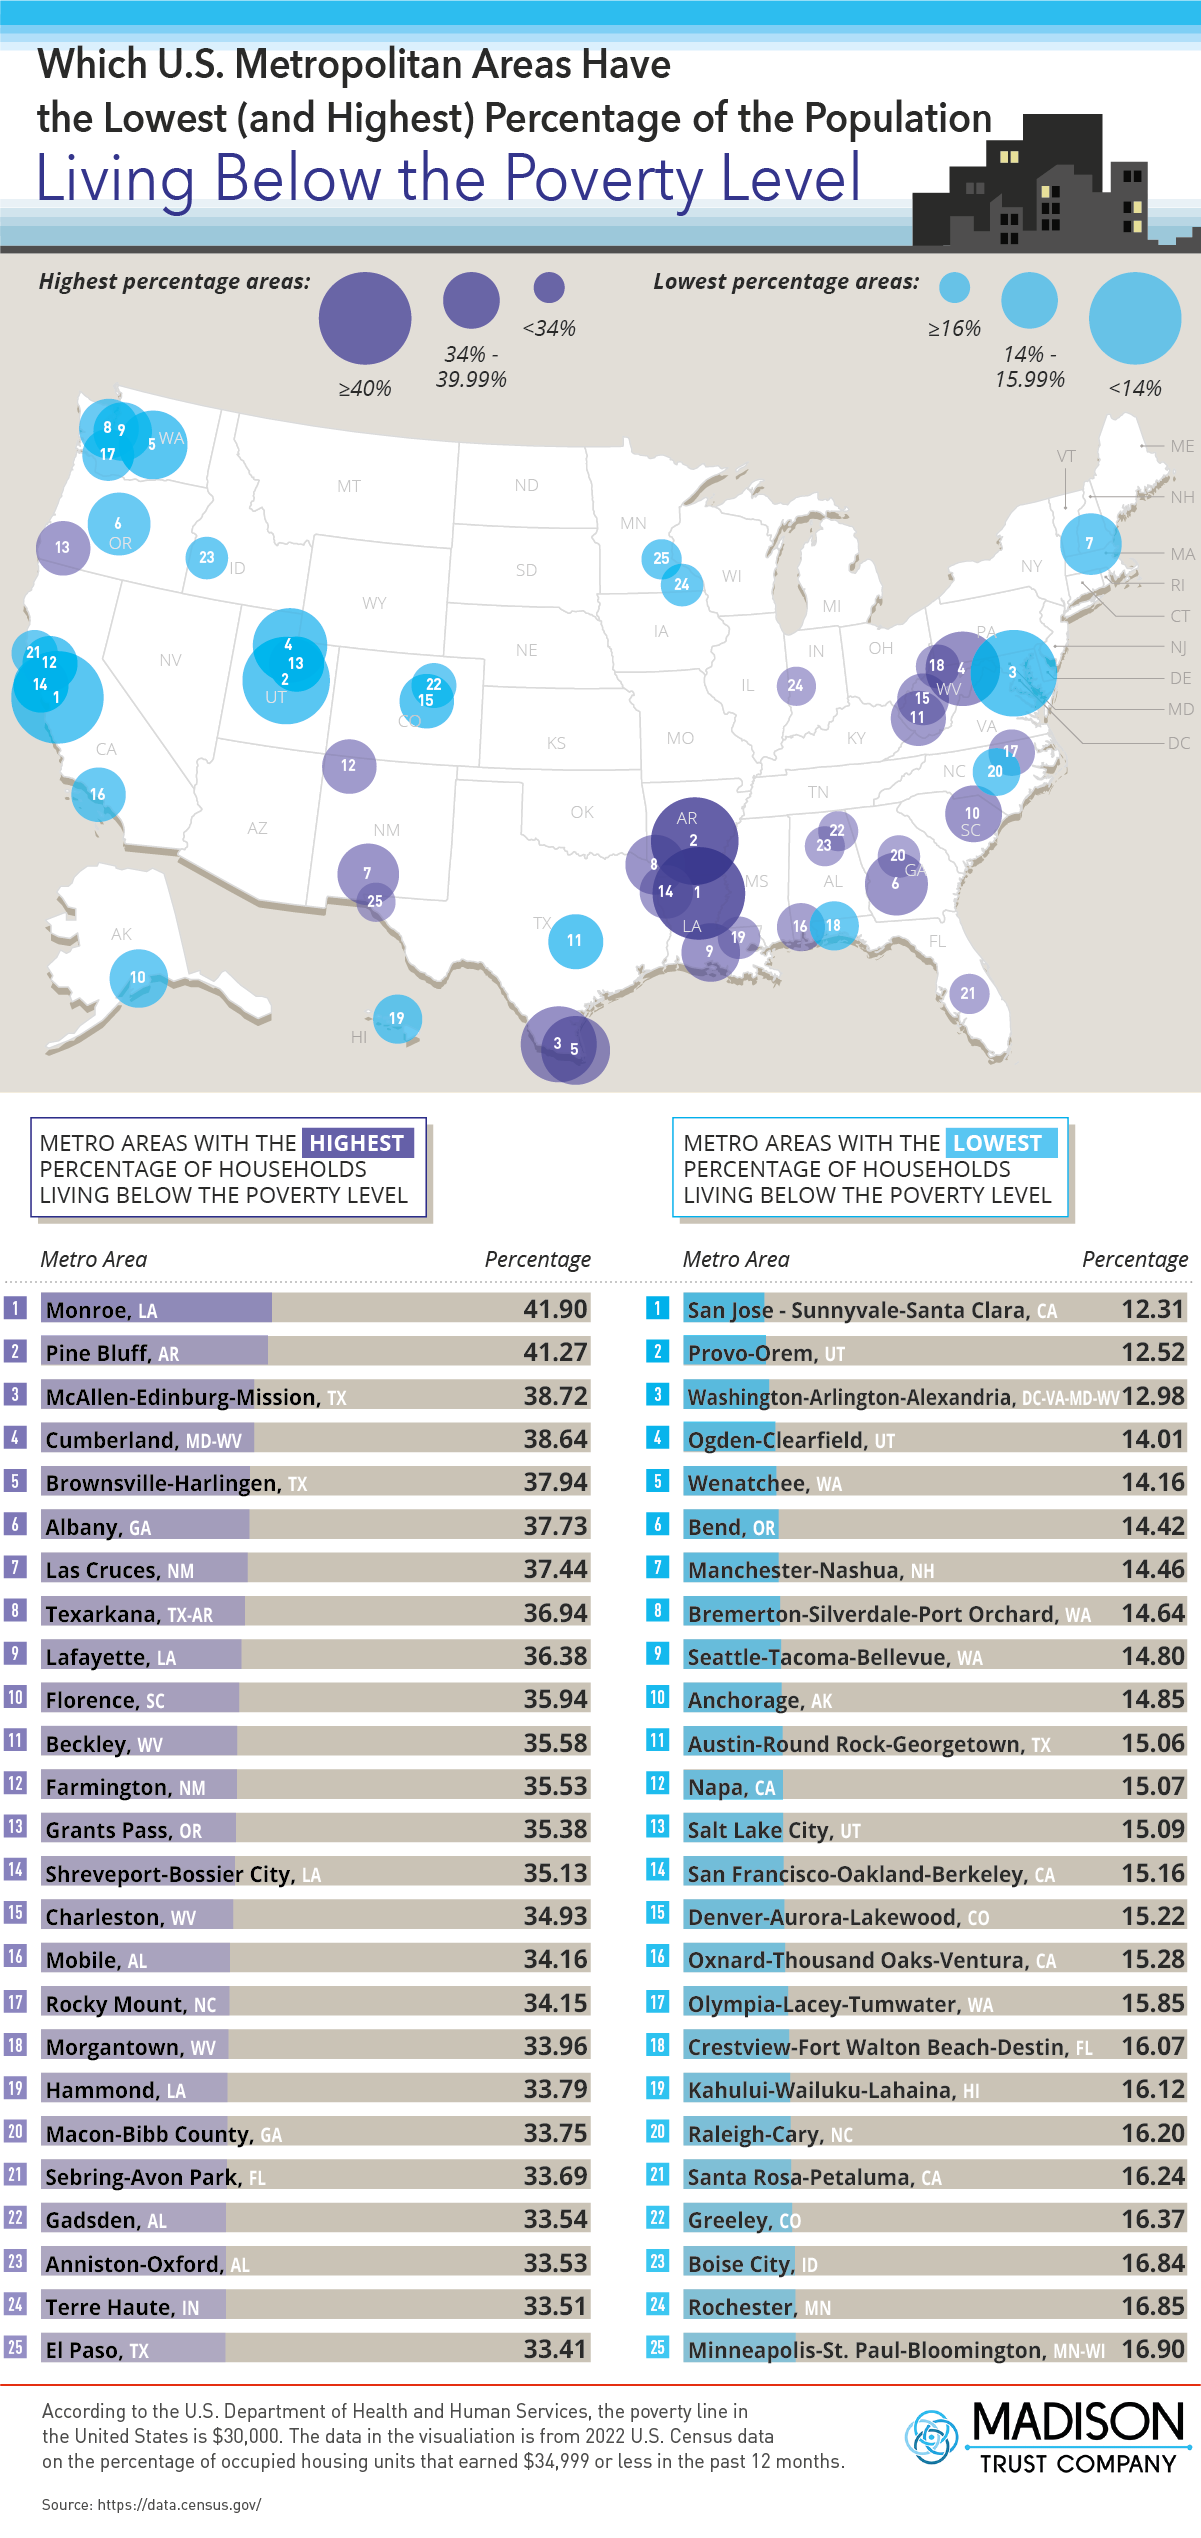 Which U.S. Metropolitan Areas Have the Lowest (and Highest) Percentage of the Population Living Below the Poverty Level? - MadisonTrust.com IRA - Infographic